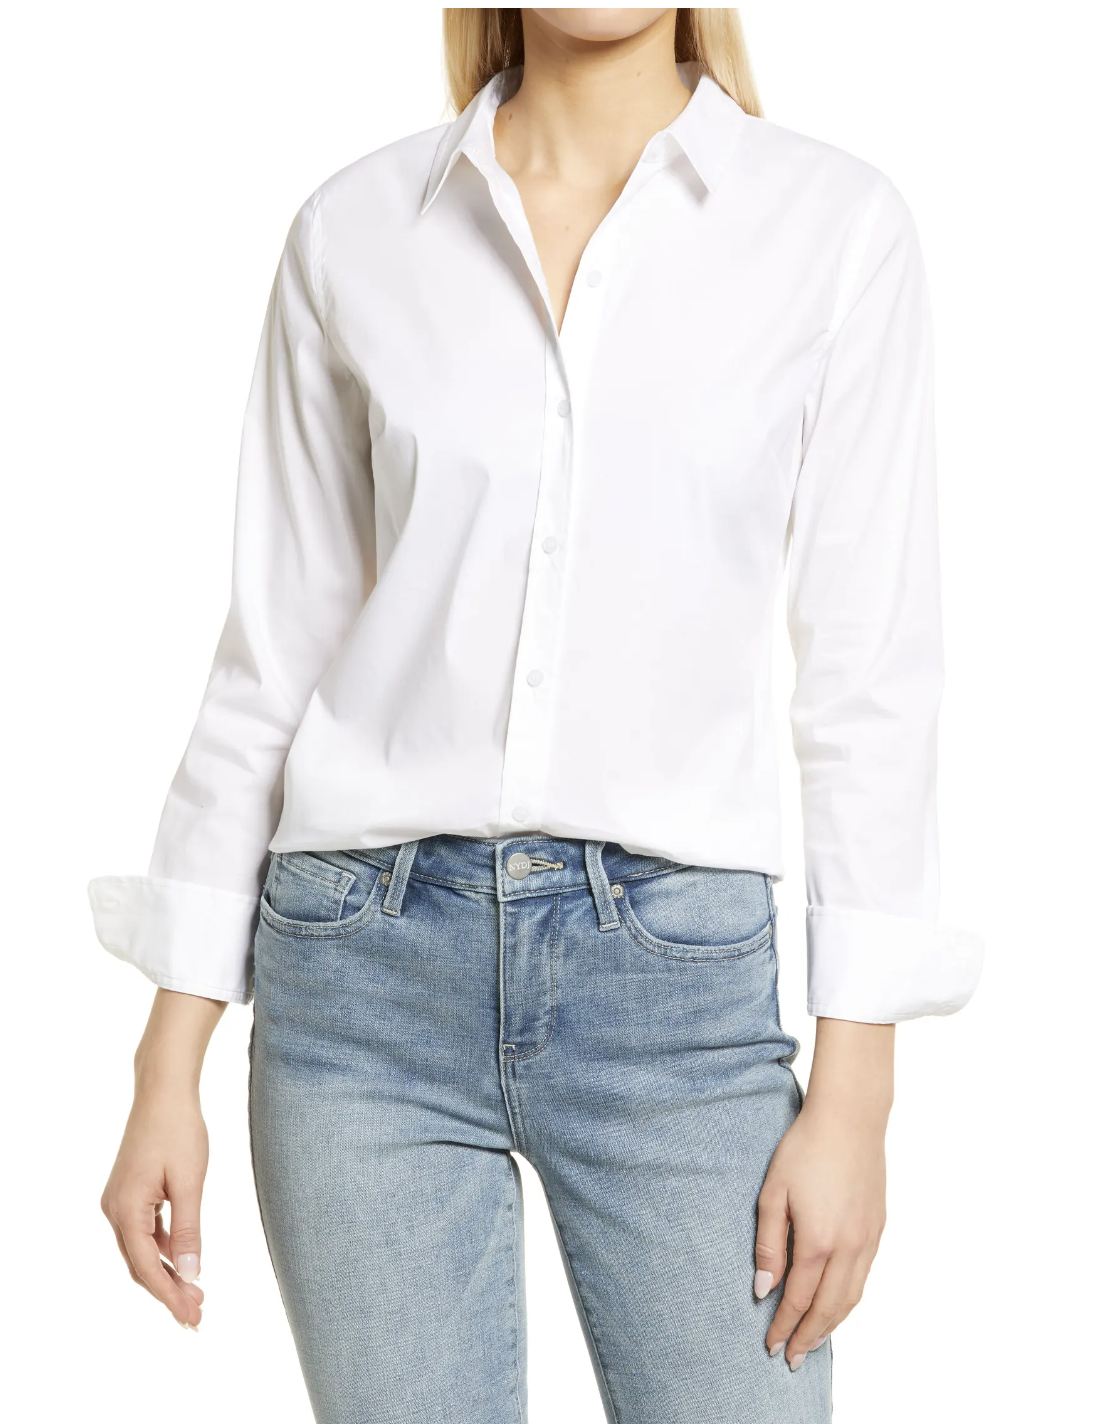 2023 spring trend: white button-up